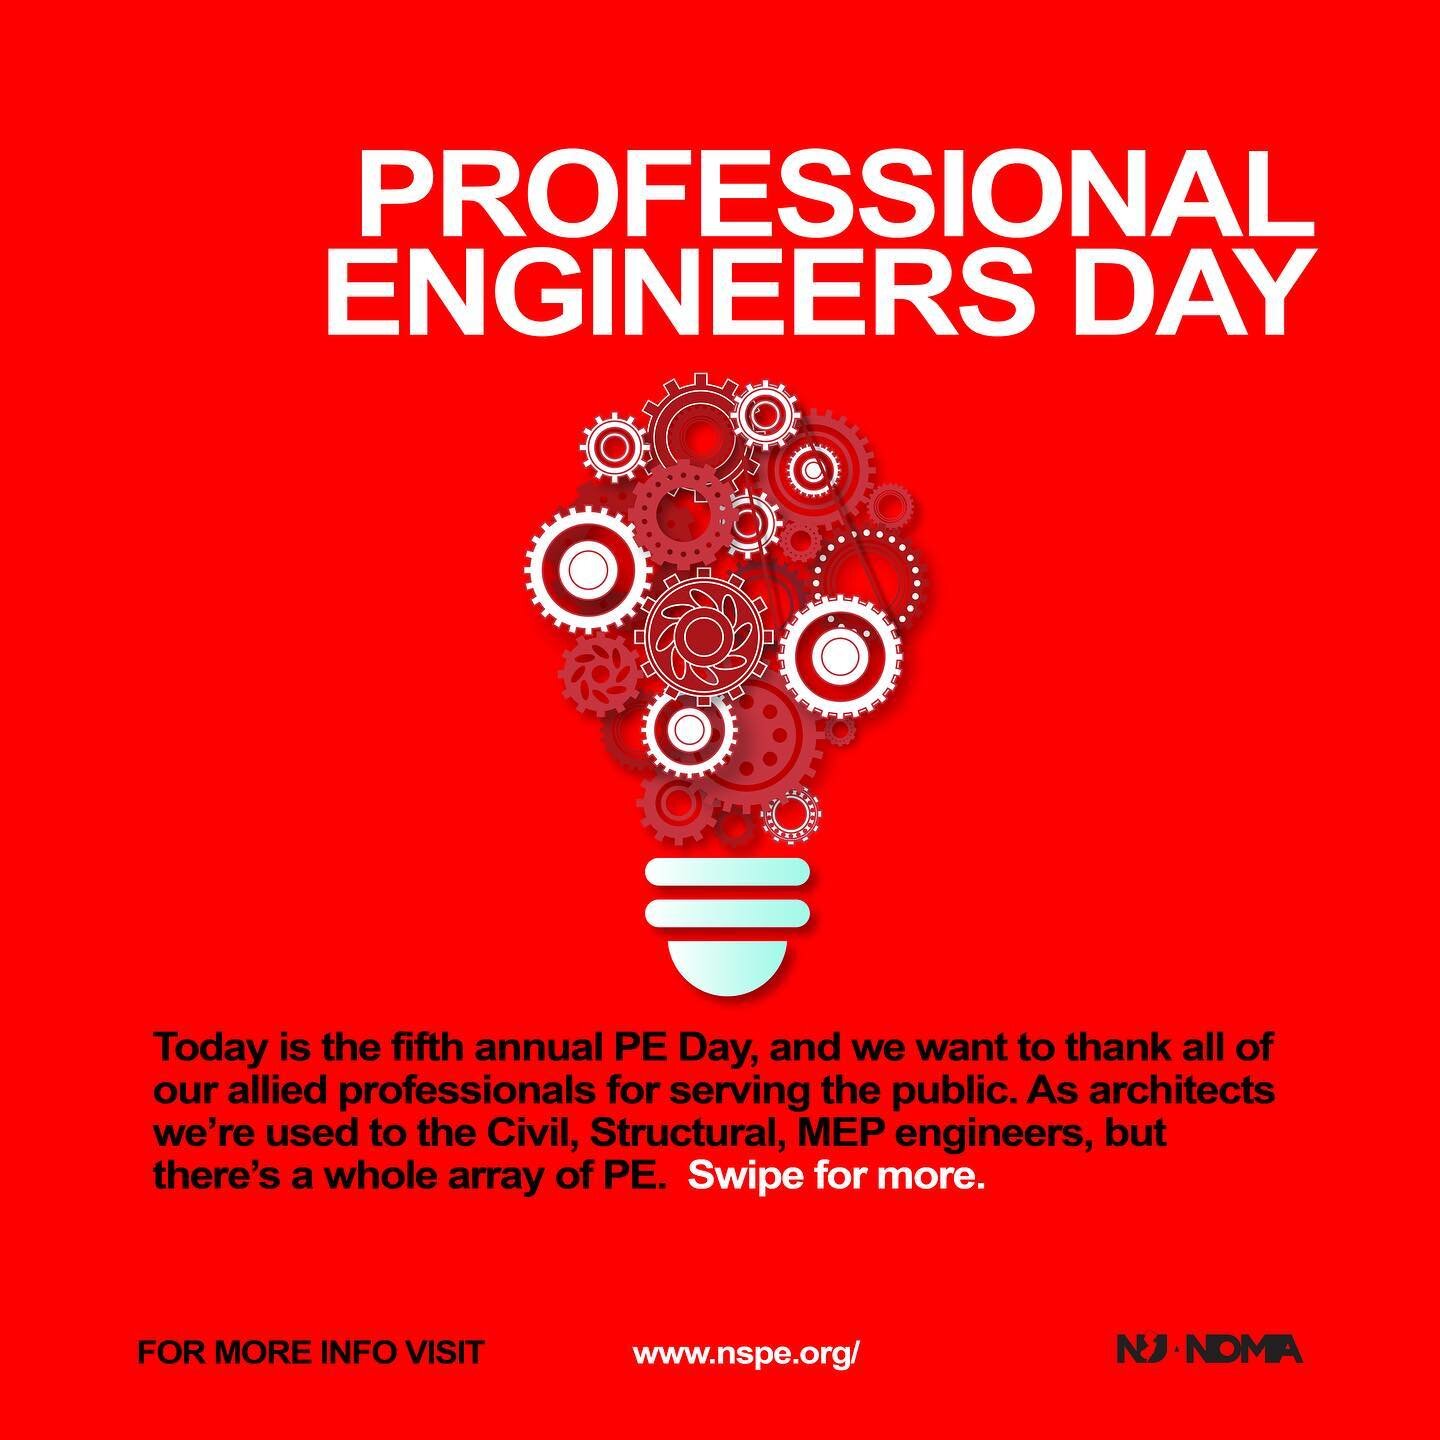 Happy Professional Engineers day to our allied professionals!!!

Can you name more than 10 engineering career paths?